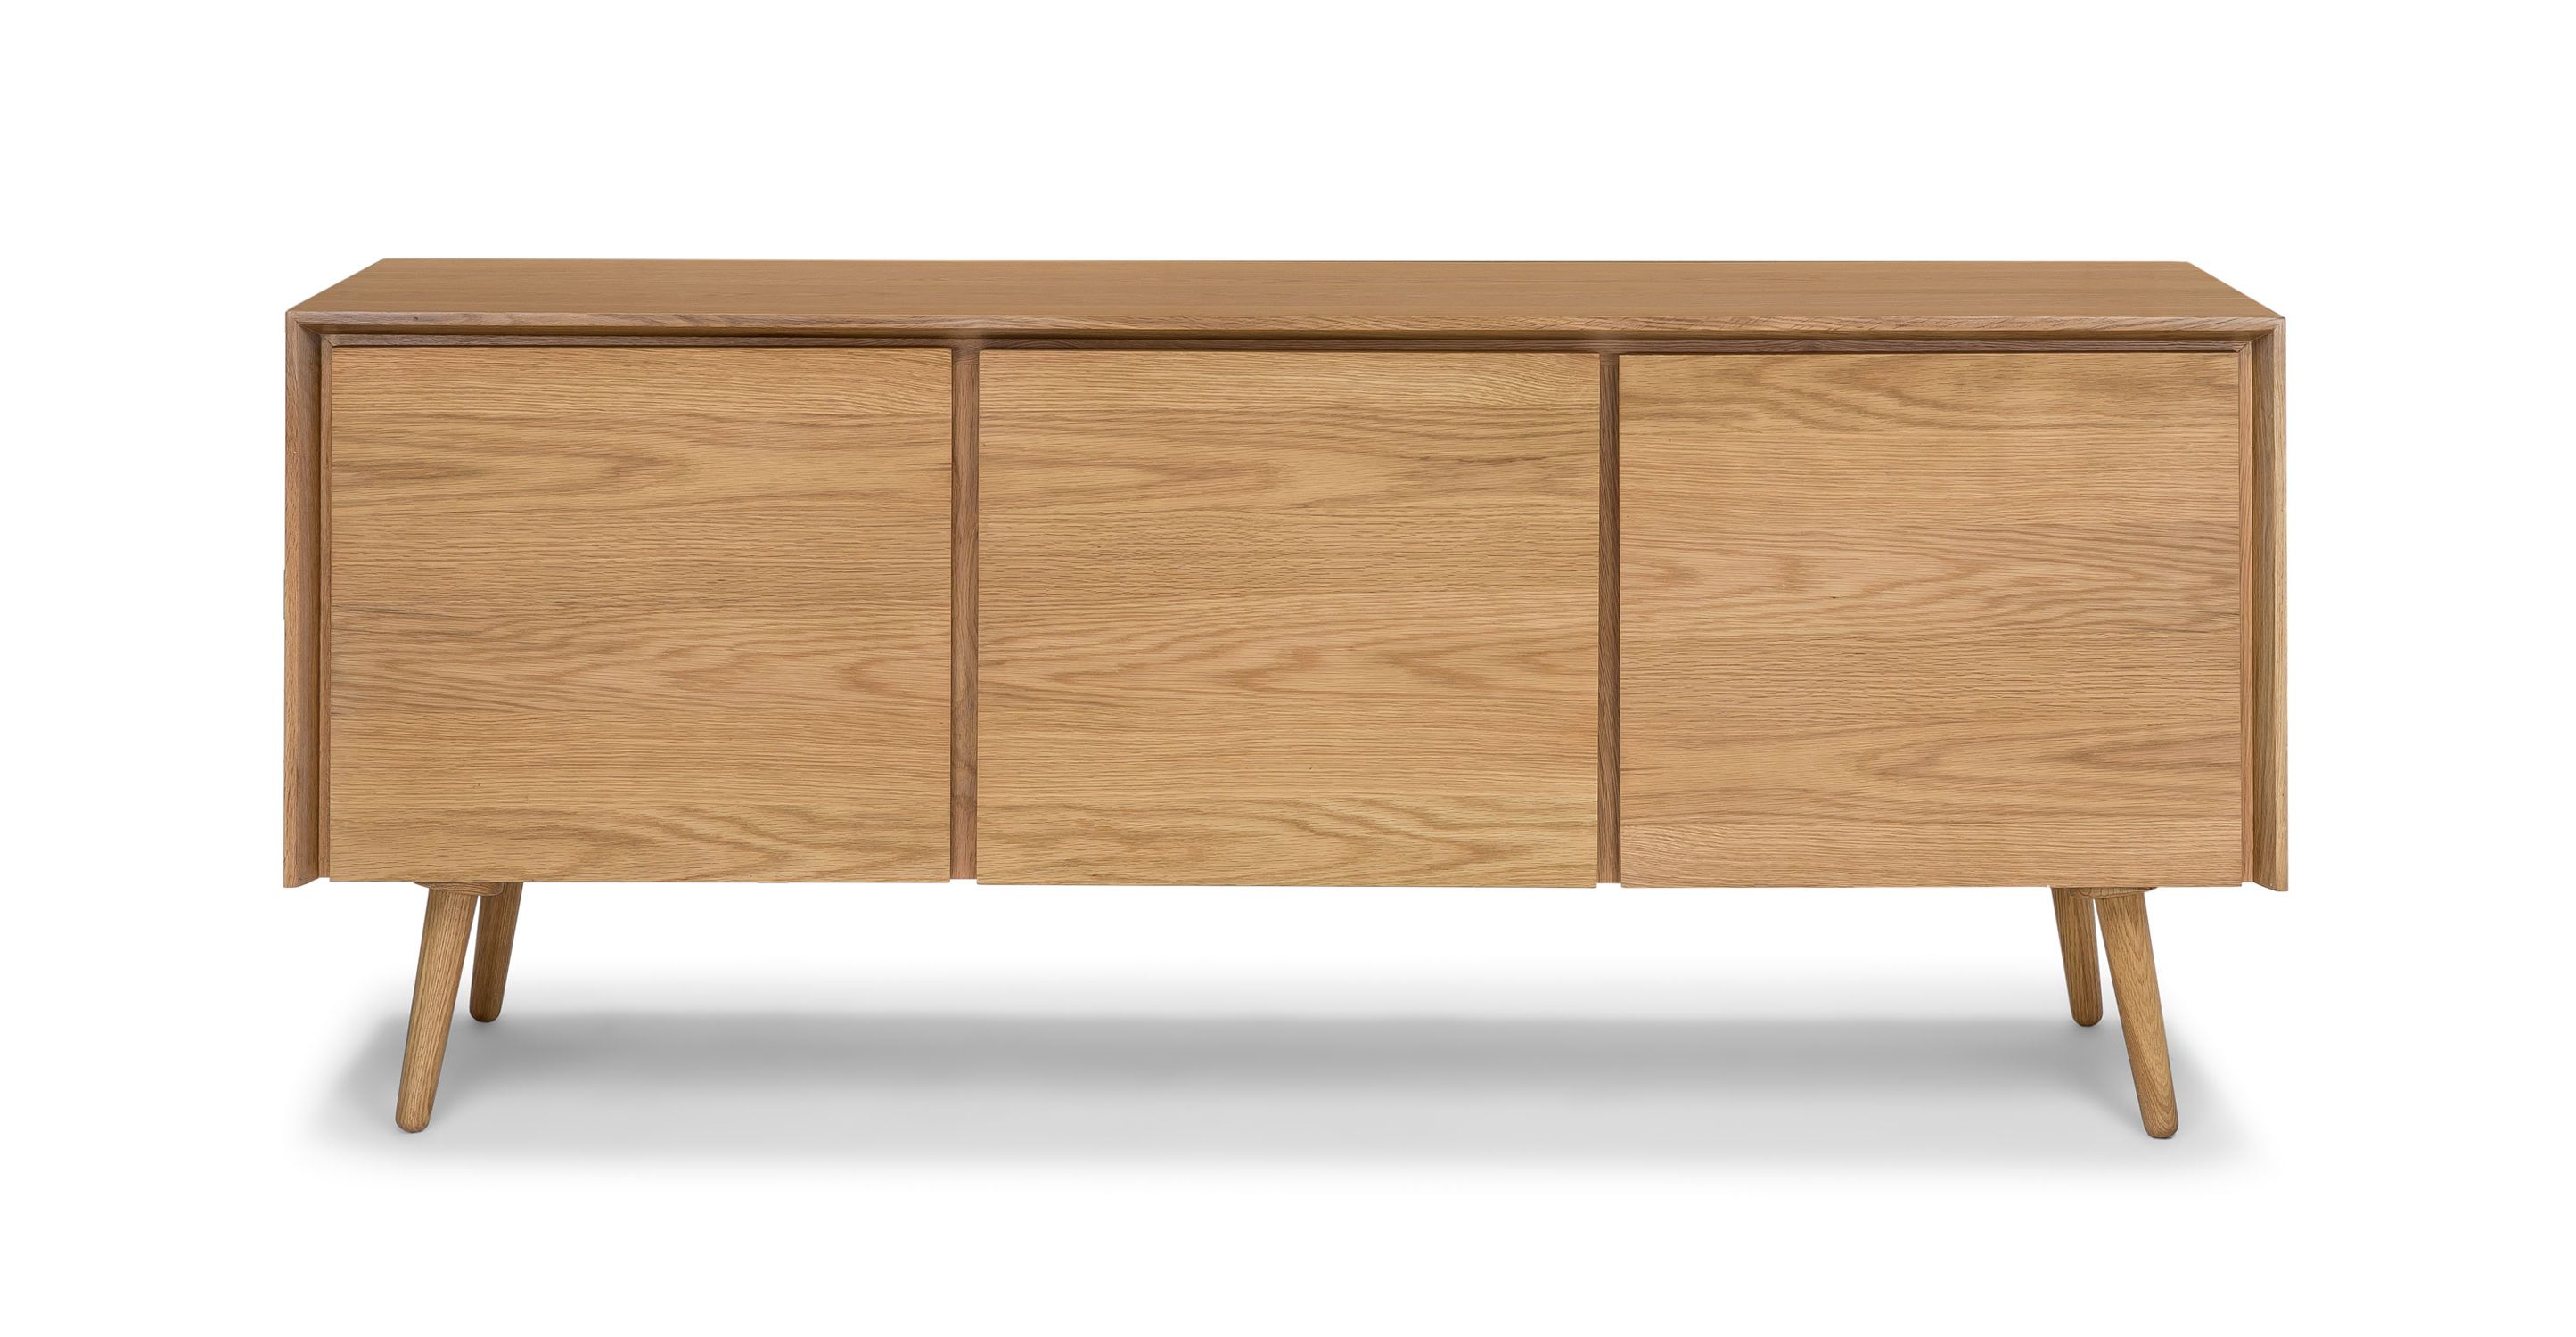 Seno 71" Oak Sideboard With Storage | Article For Transitional Oak Sideboards (Gallery 6 of 20)